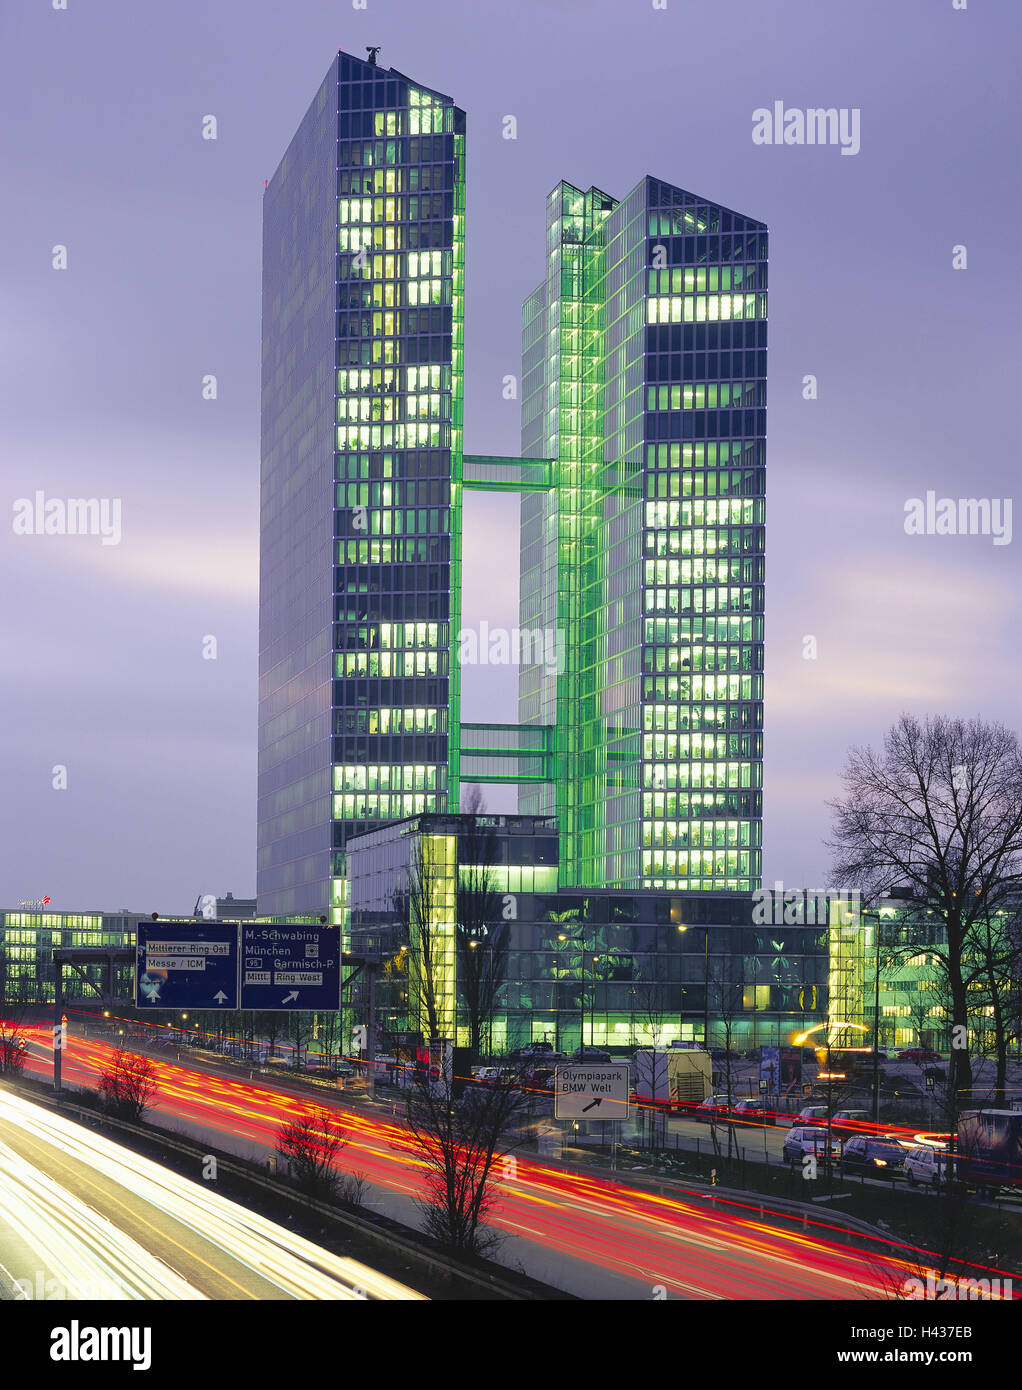 Germany, Bavaria, Munich, 'highlight Tower', highway, light tracks, evening, lighting, Upper Bavaria, München-Schwabing, building, highlight Tower, high rises, high-rise office blocks, office towers, office buildings, architecture, structures, cars, glass front, facade, connection, glass, steel, dusk, lights, red, yellow, Stock Photo